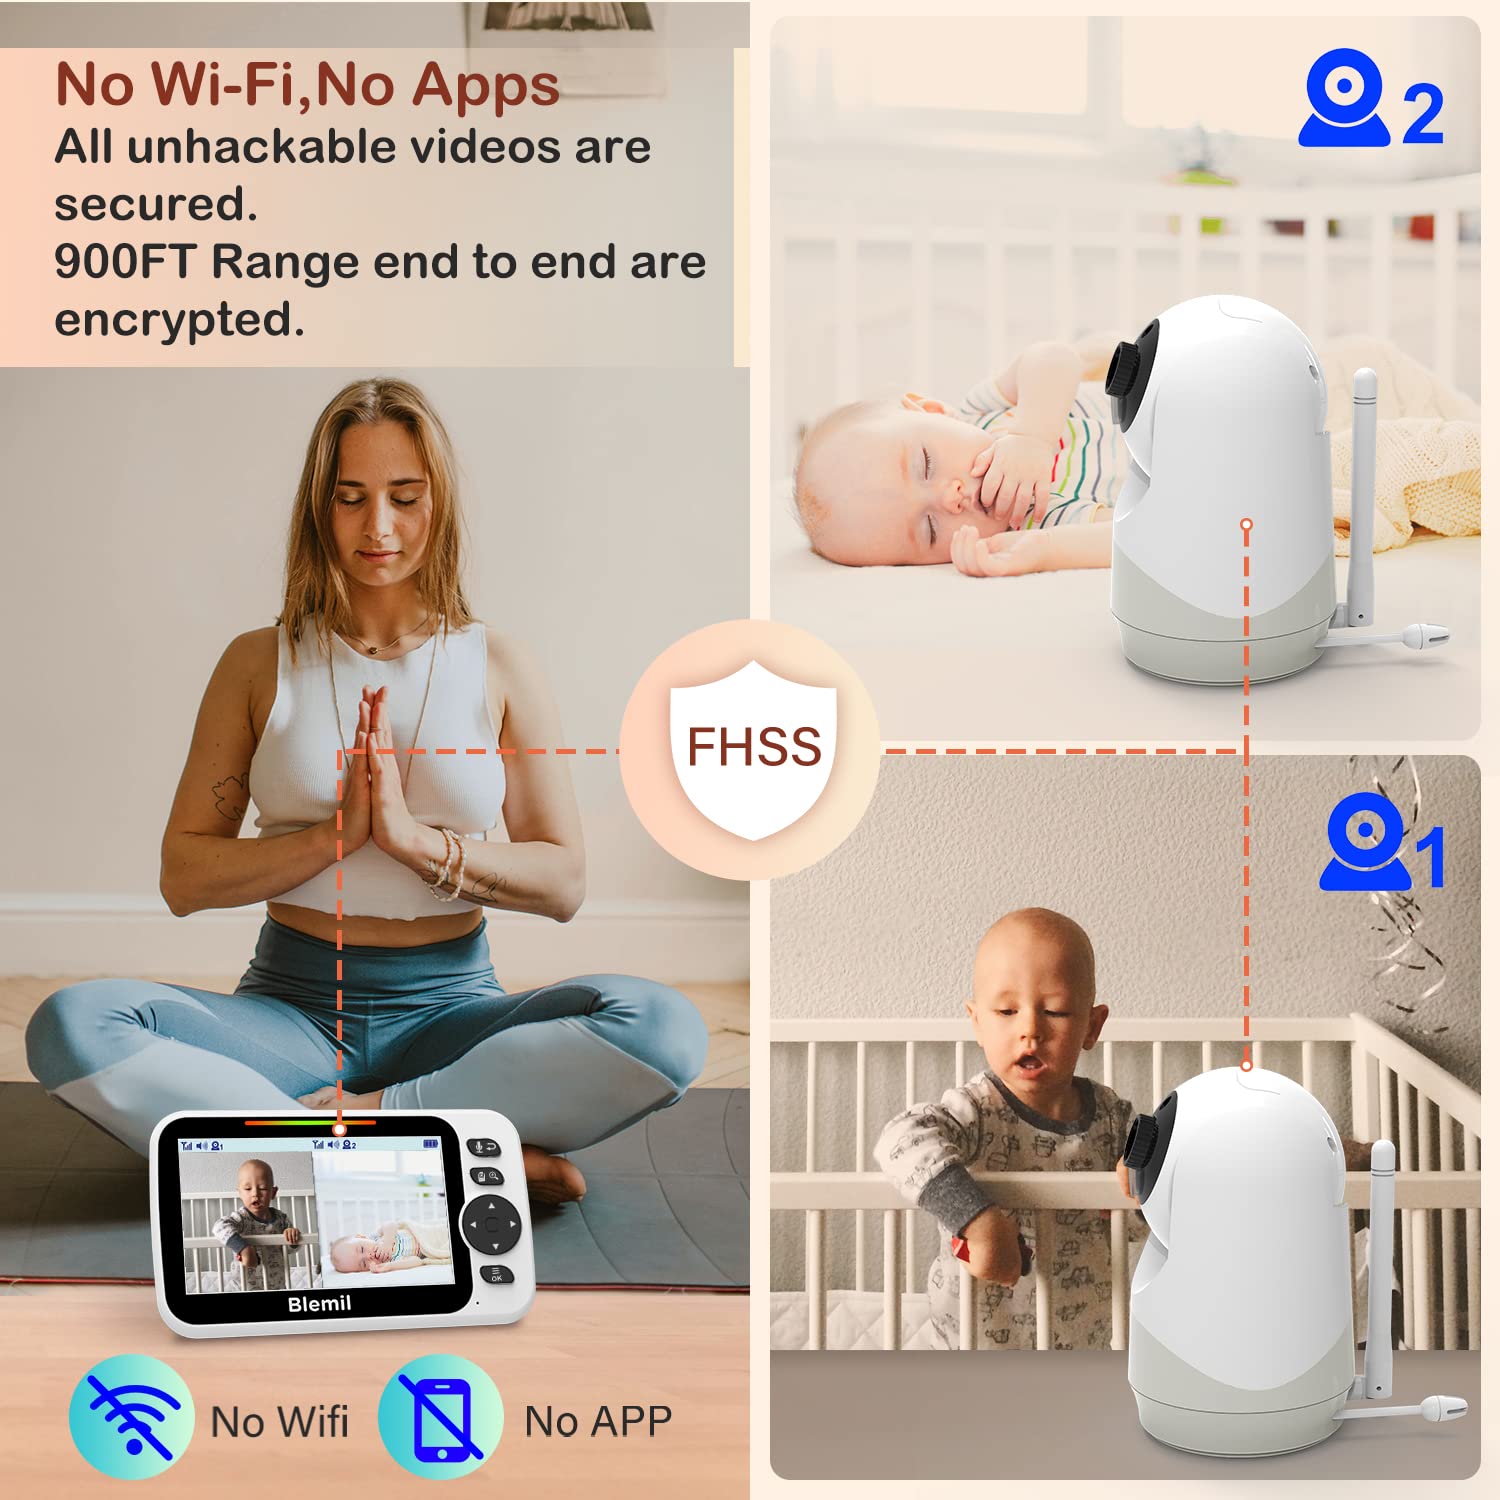 Blemil Upgrade Baby Monitor with 30-Hour Battery, 5" Large Split-Screen Video Baby Monitor with 2 Cameras and Audio, Remote Pan/Tilt/Zoom, Two-Way Talk, Room Temperature, Auto Night Vision